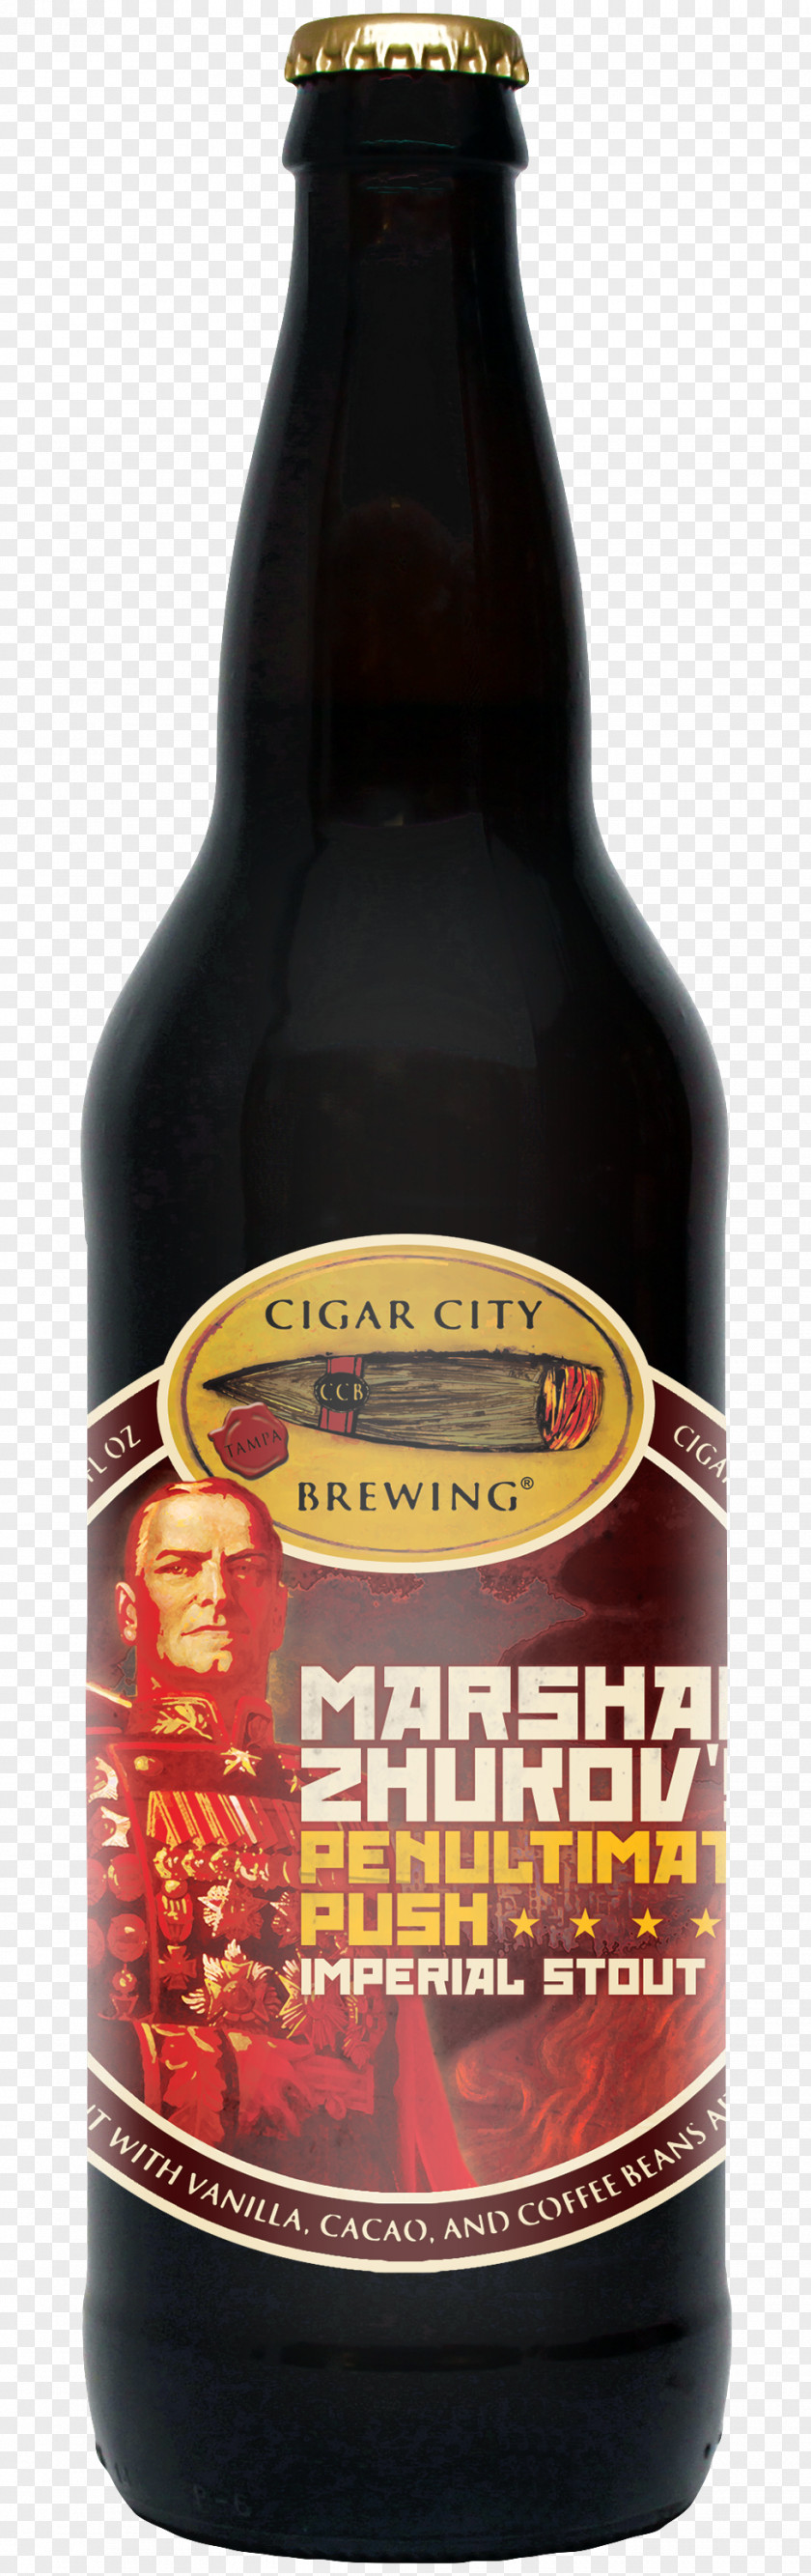 Beer Georgy Zhukov Ale Cigar City Brewing Company Russian Imperial Stout PNG